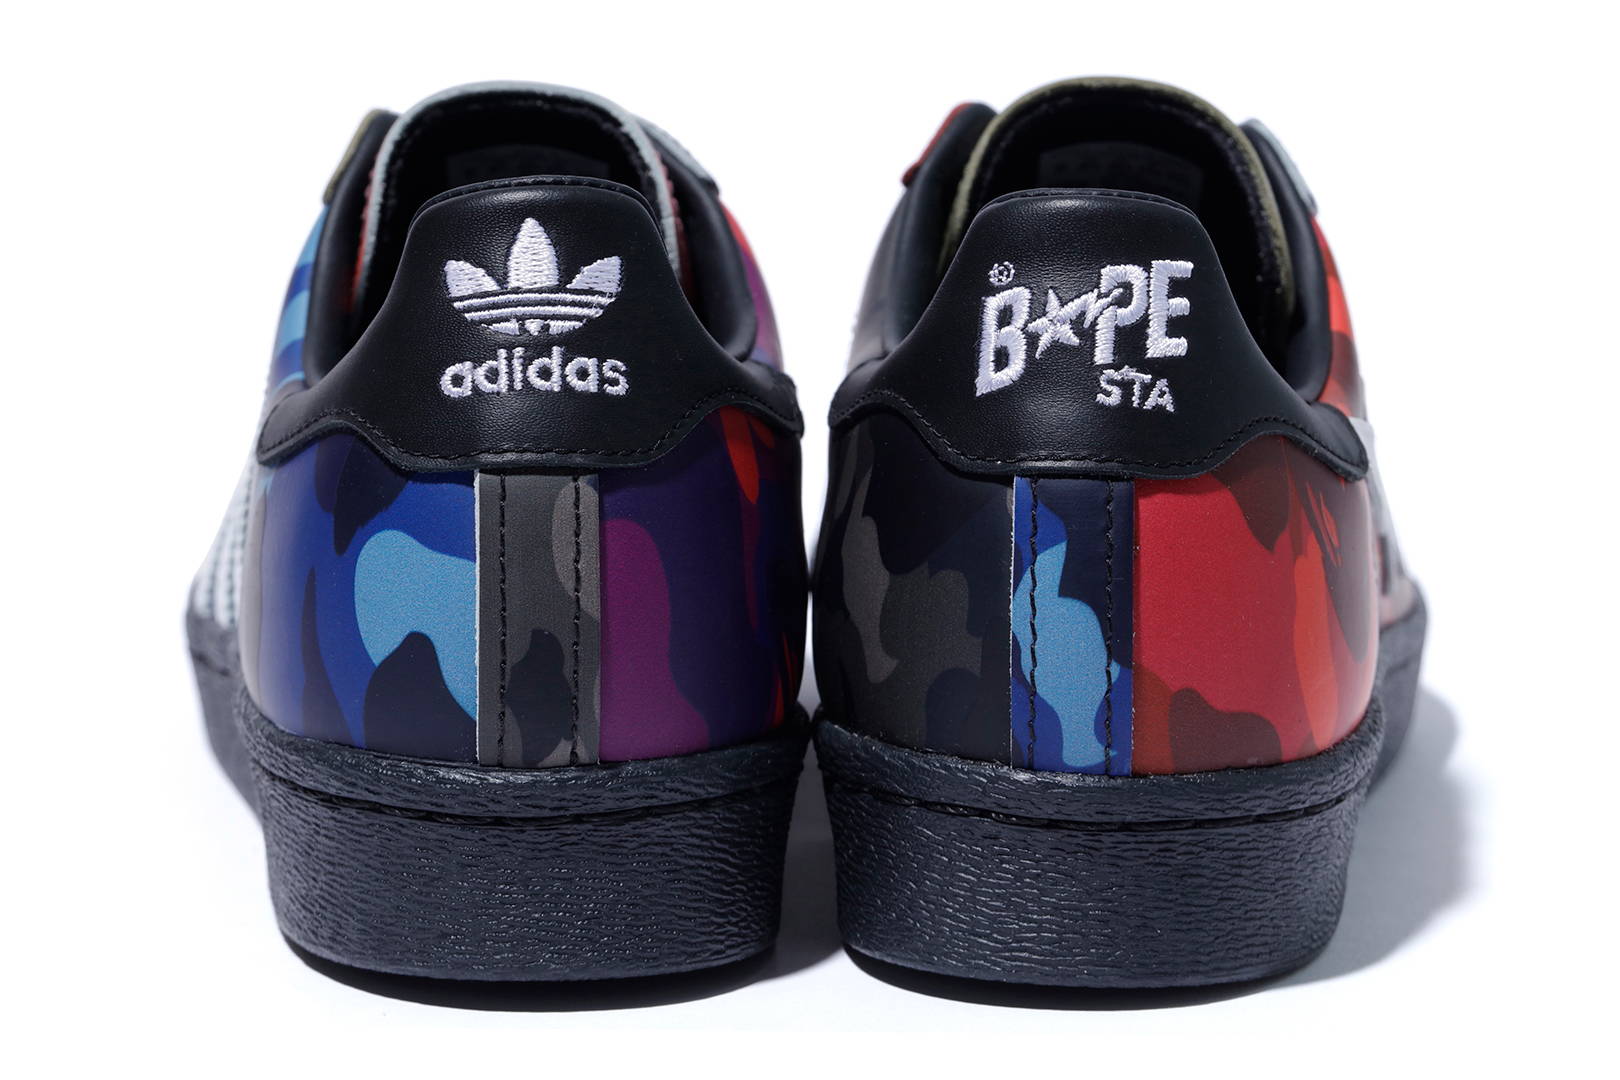 Bape Has A New Adidas Superstar Collab Dropping This Week | Complex